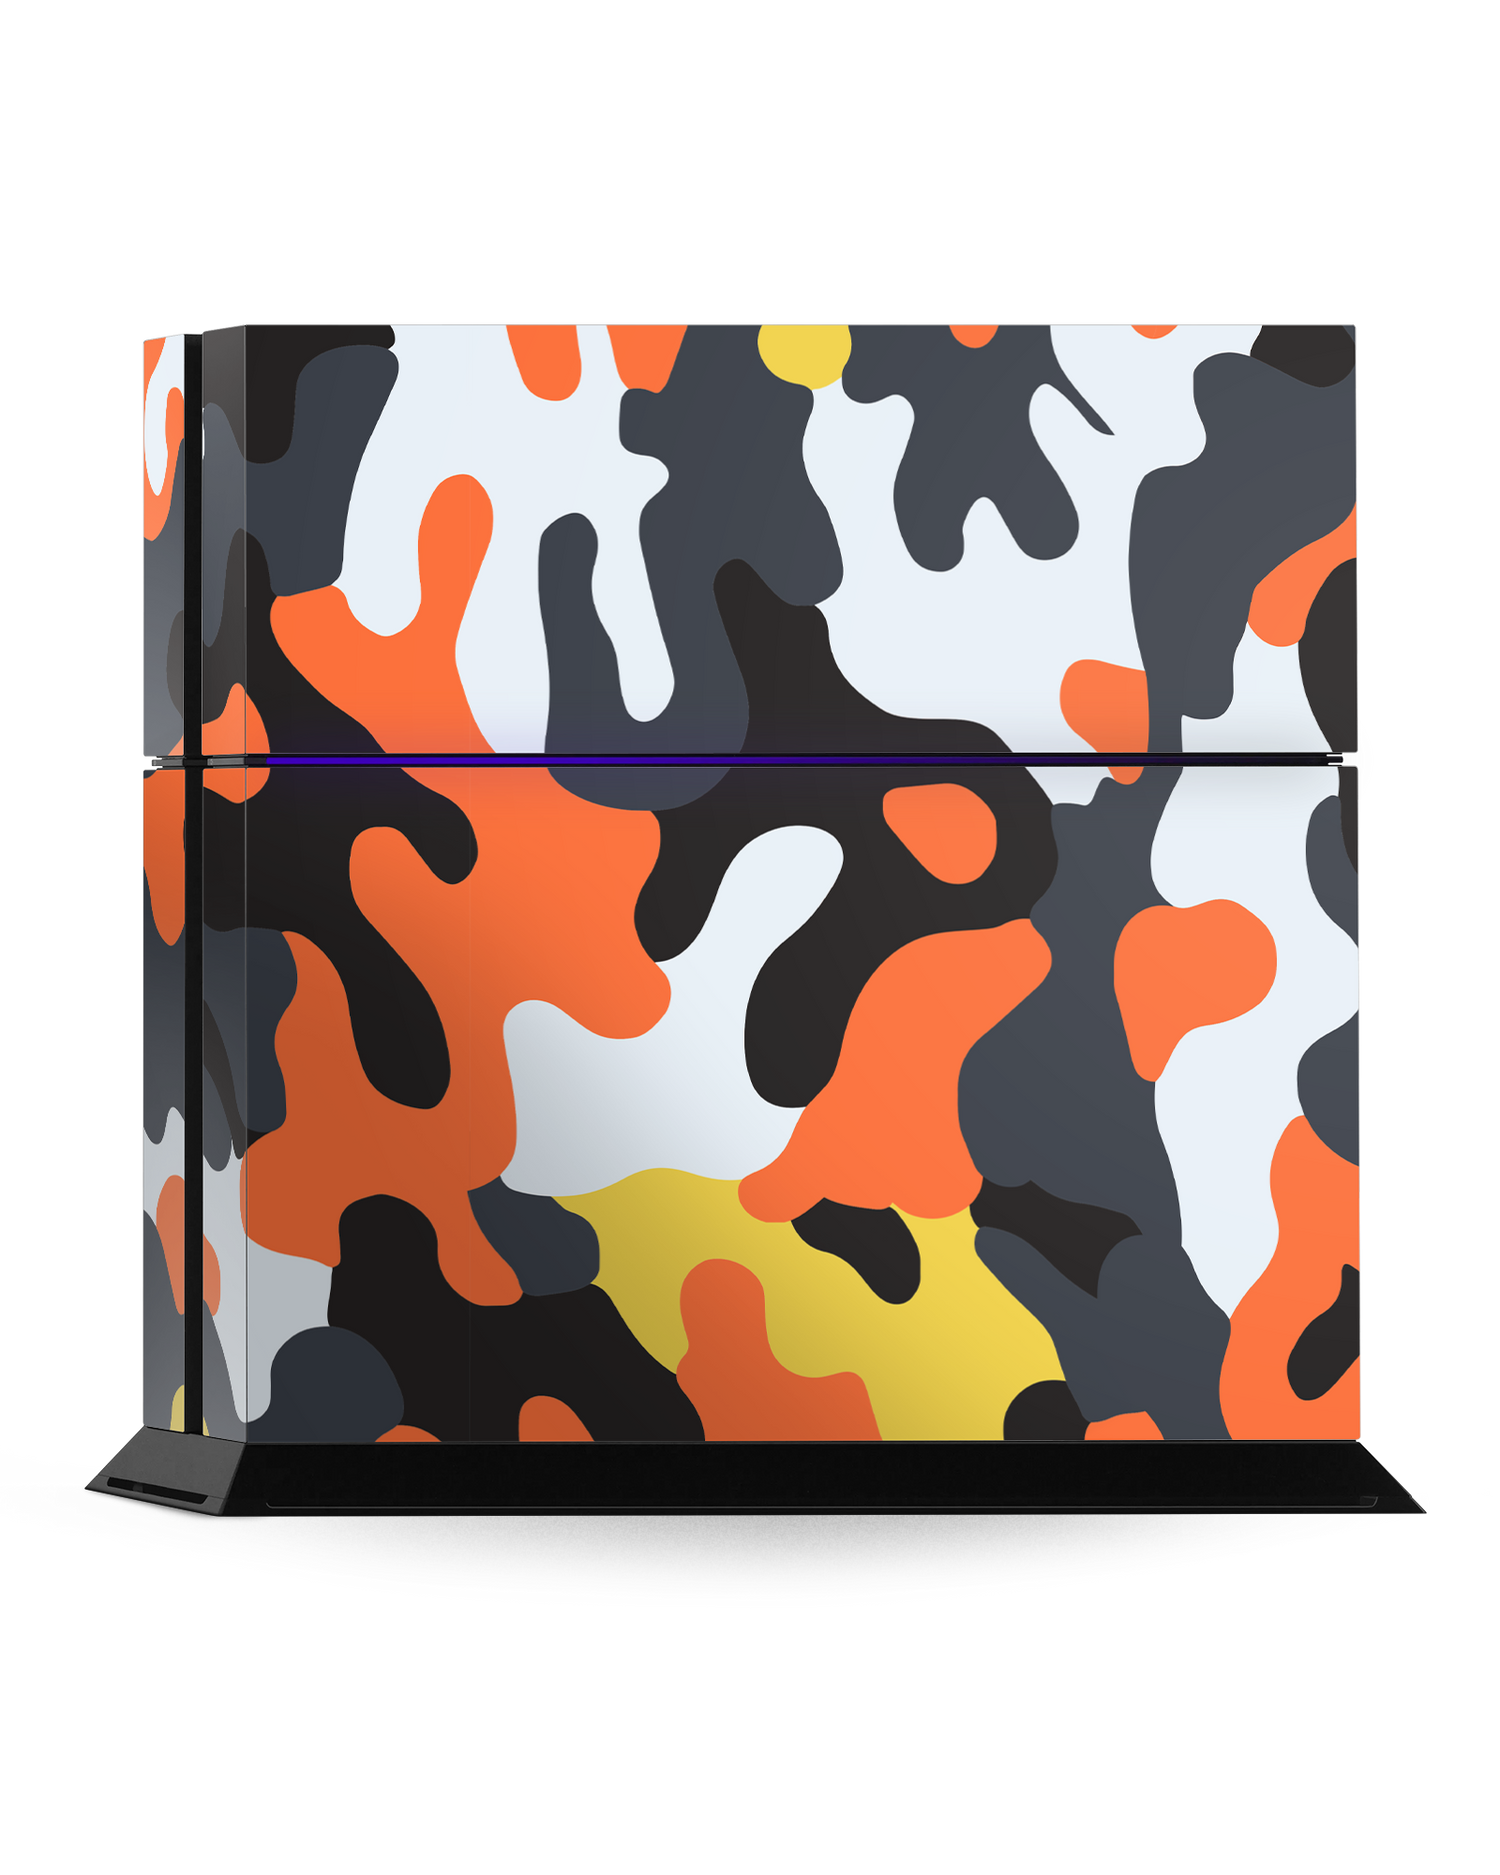 Colourful Camo Console Skin for Sony PlayStation 4: Standing